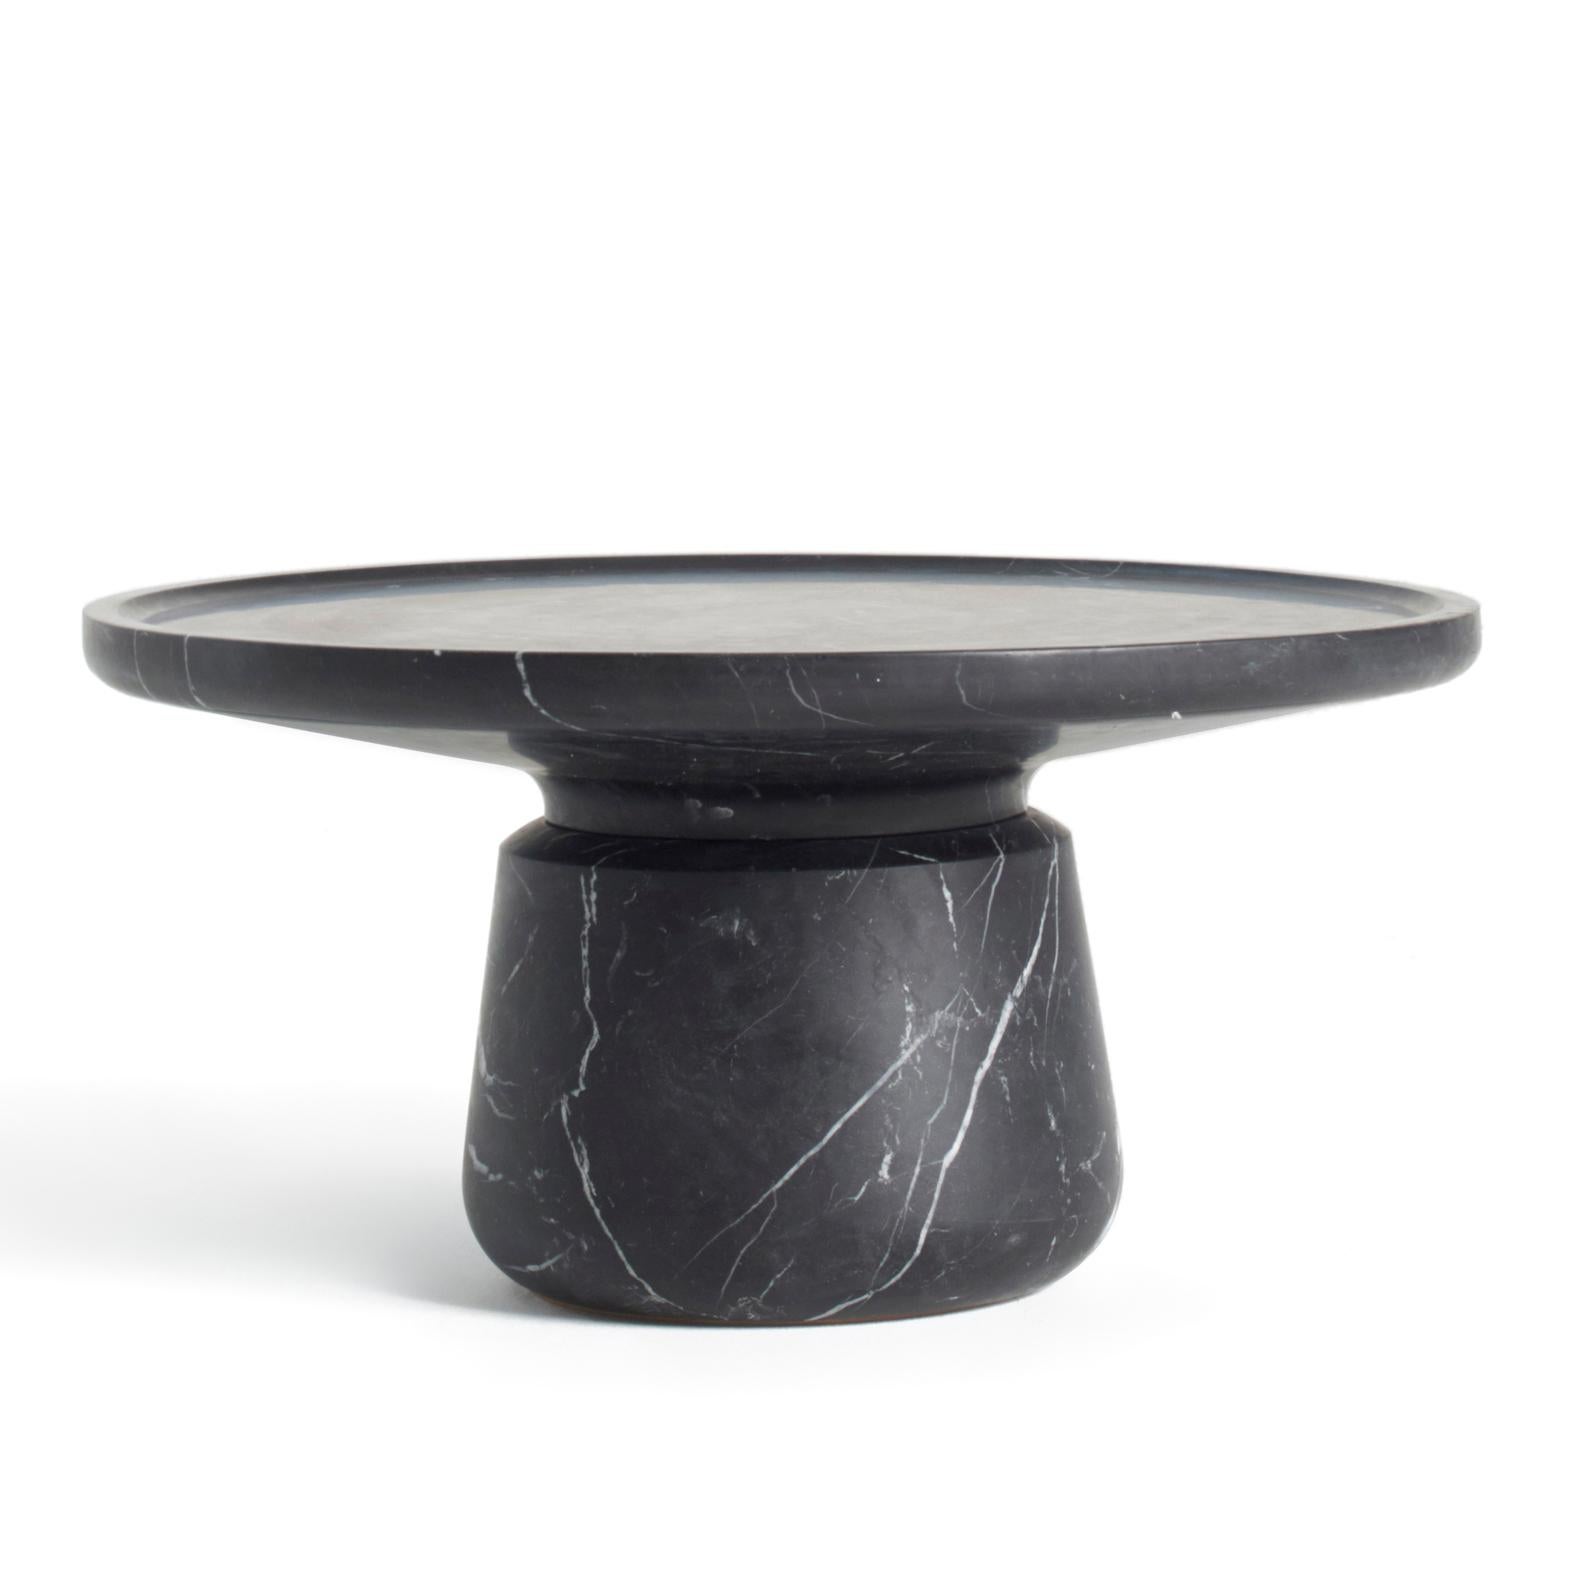 Large Marble Altana side table by Ivan Colominas
Dimensions: 29.4 x 75 x 36
Materials: Nero Marquinia

Ivan Colominas studied industrial design at the UCH-CEU in Valencia, where he also attained a Master’s of Transportation Design. The collaboration